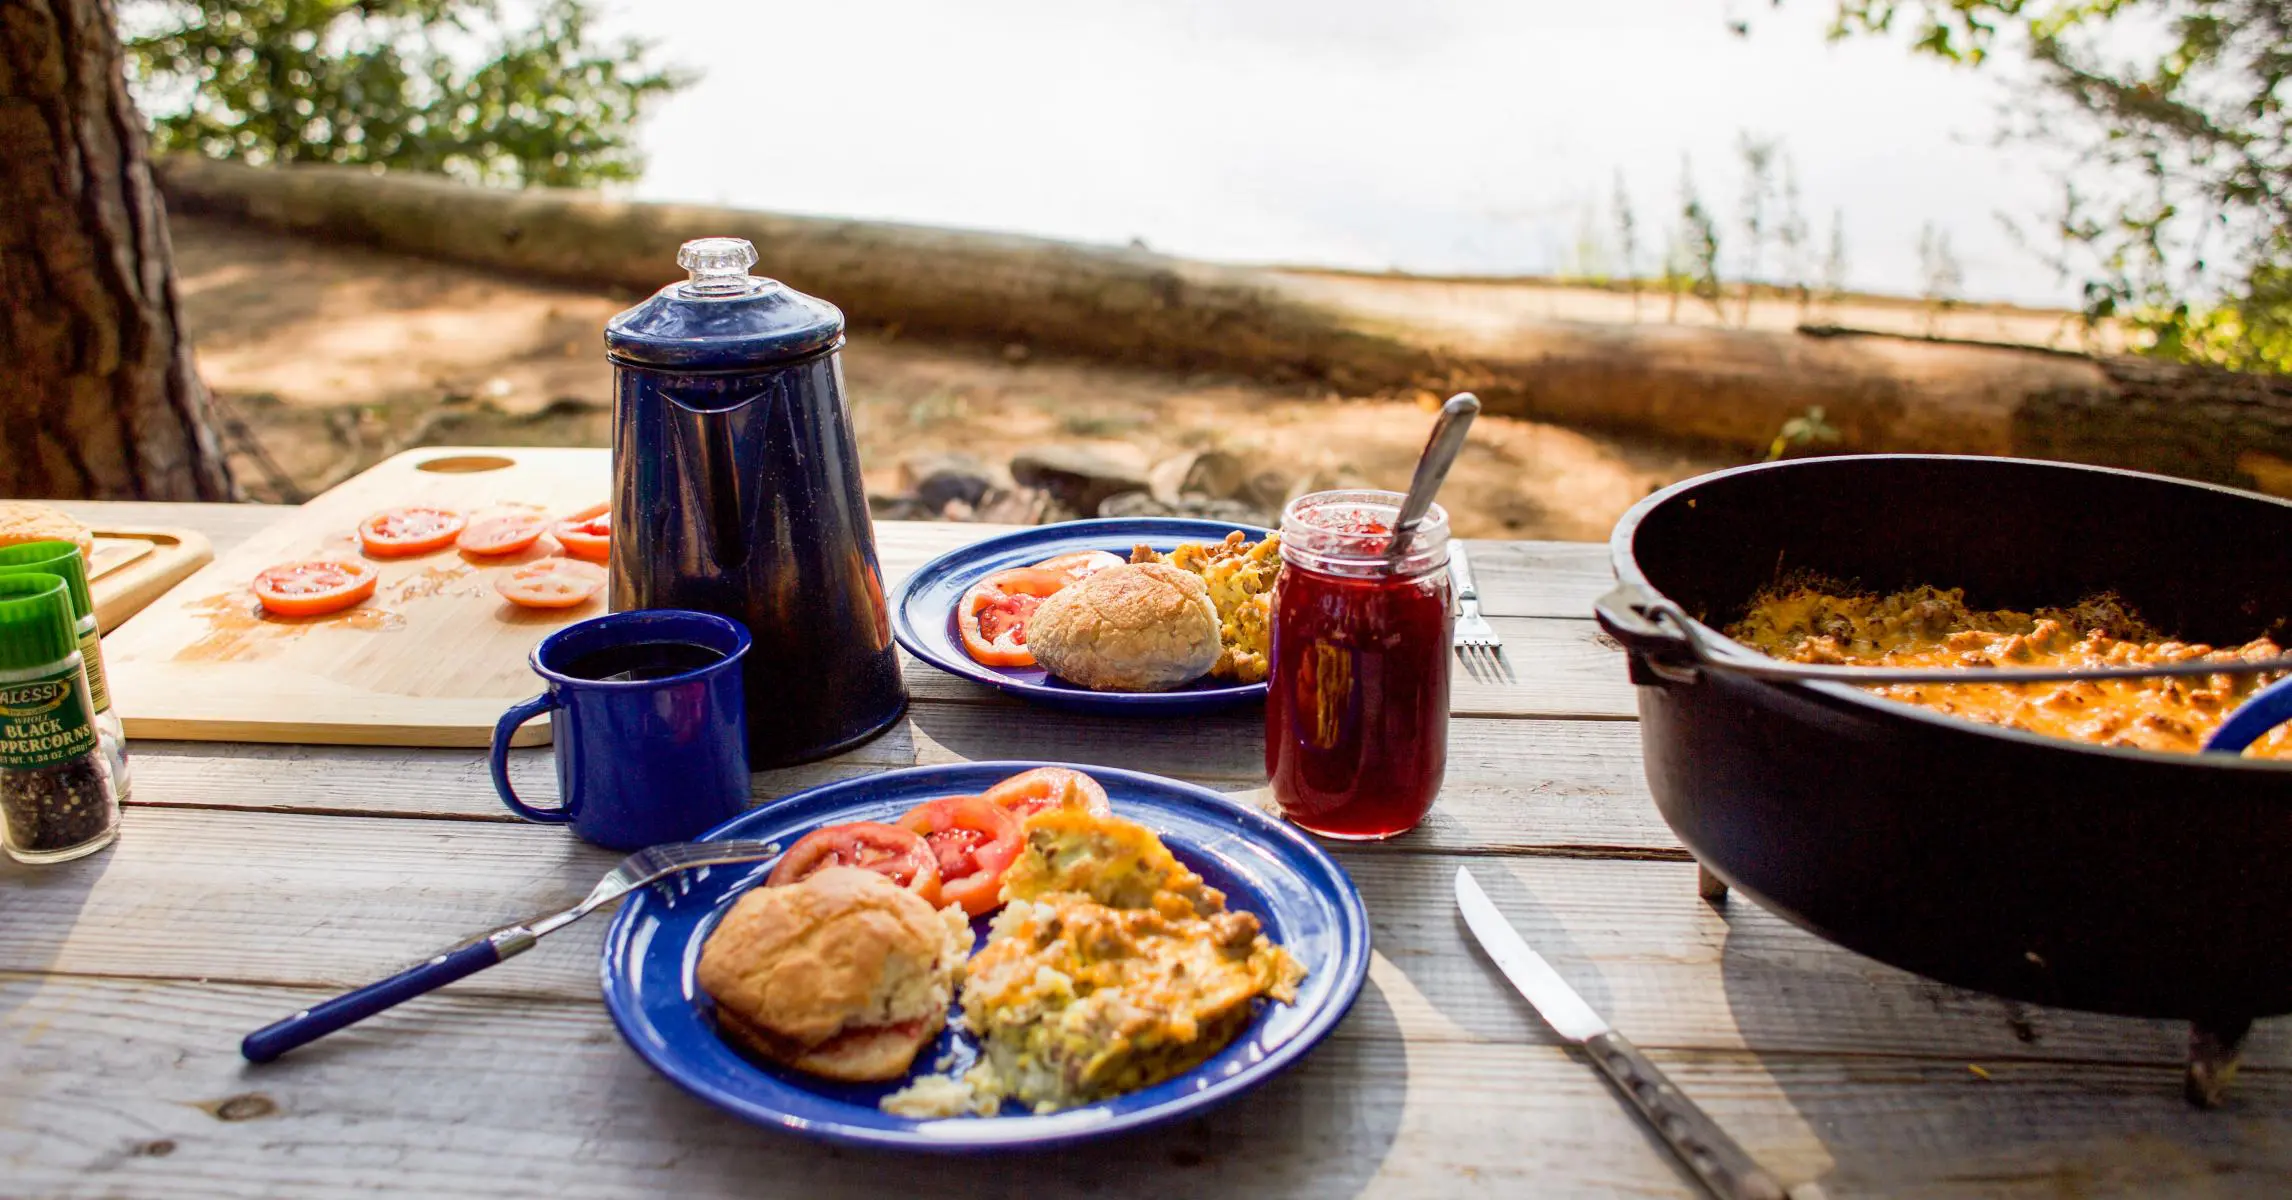 A camp scene with a pot of coffee, blue plate with egg breakfast, and Dutch oven in frame